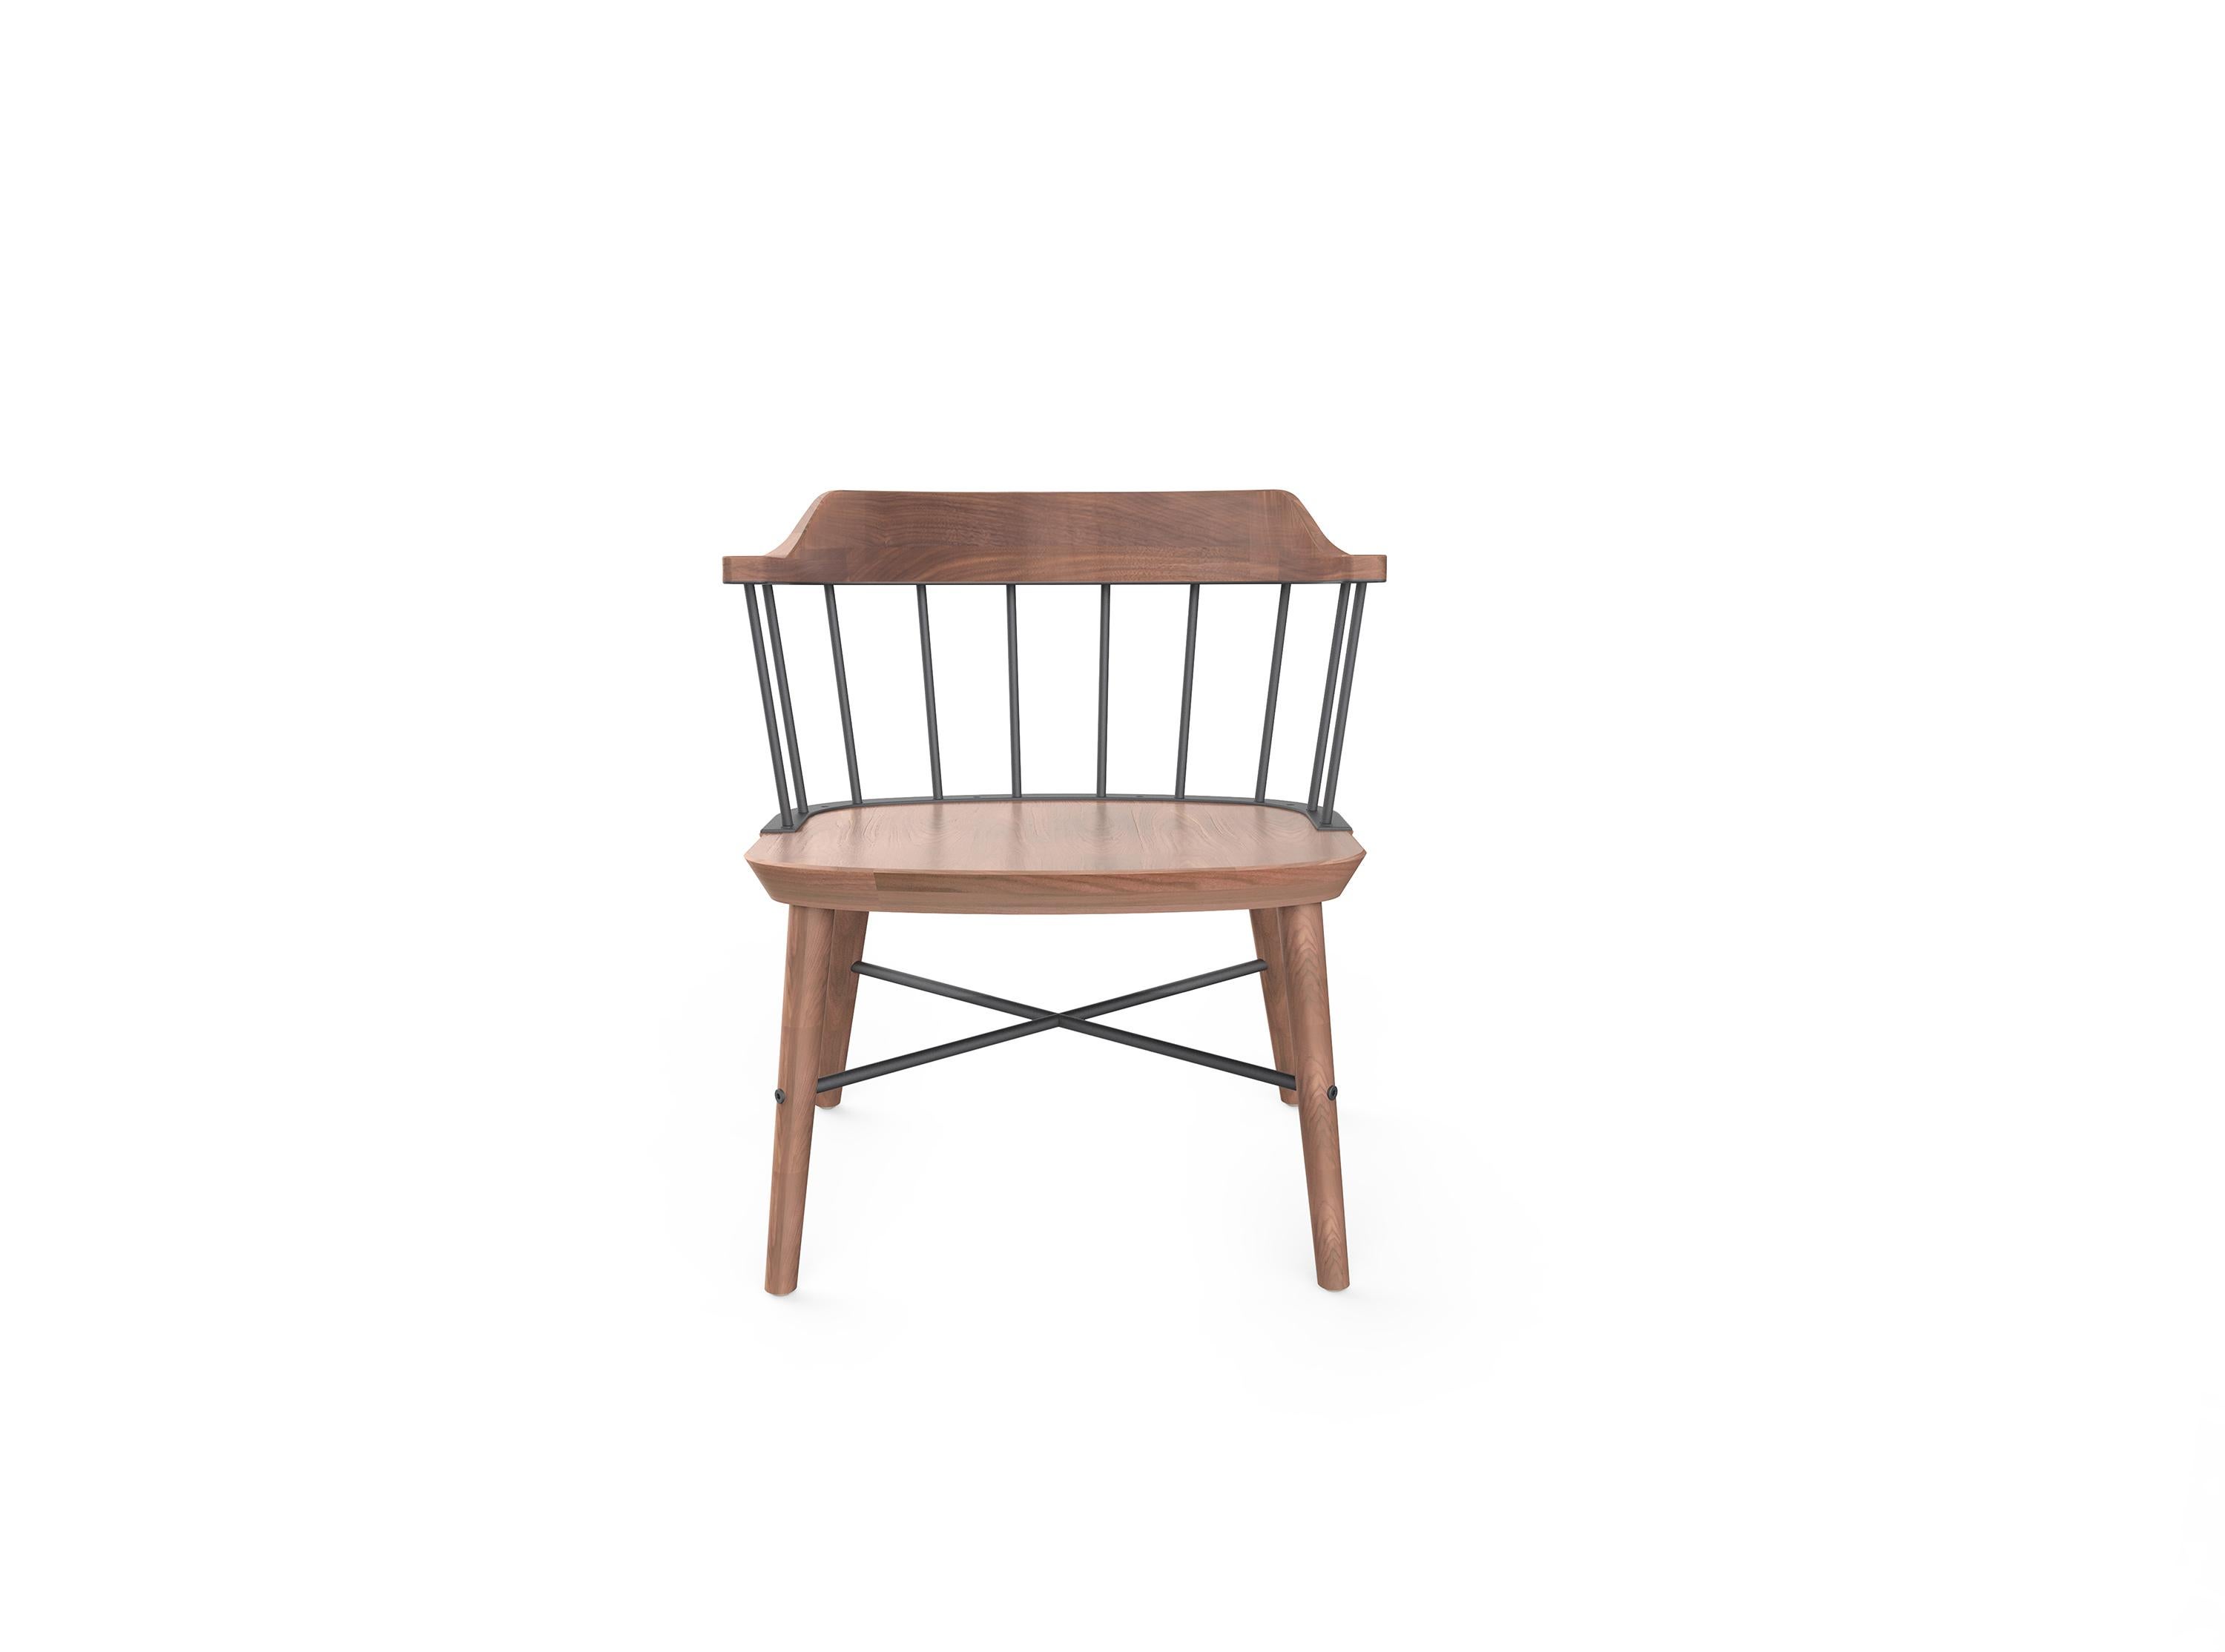 The Exchange chair is an award-winning contemporary wood and steel chair inspired by the traditional Windsor form.

By exchanging the conventional wooden spindles and stretcher of the Windsor back with steel, Crème has produced a new chair that